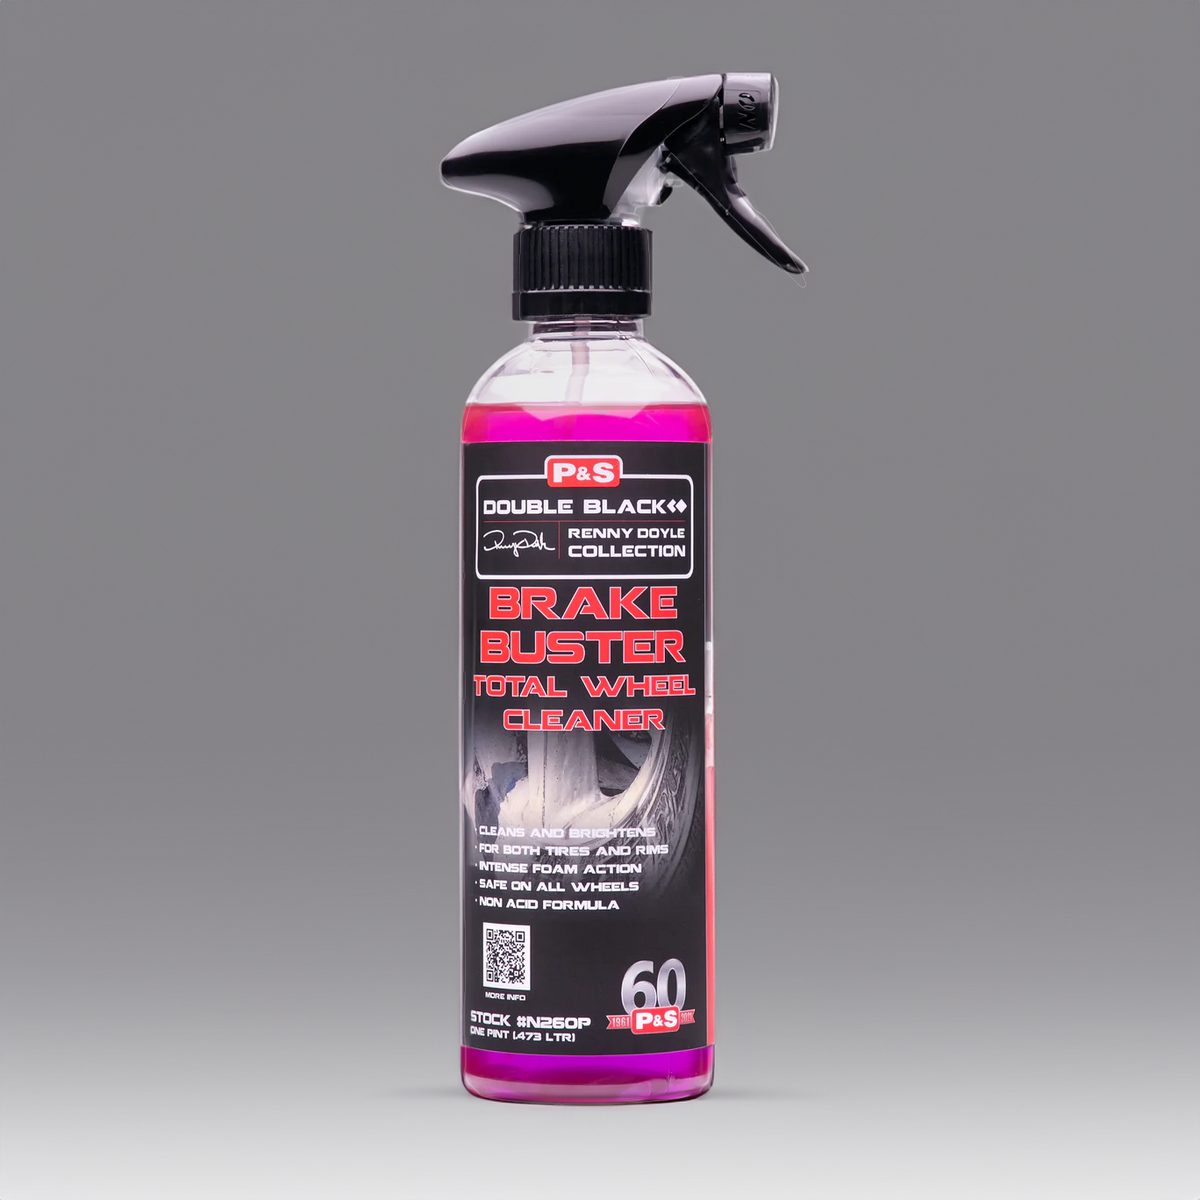 P&S Brake Buster Wheel Cleaner Review - Is This Product Worth The